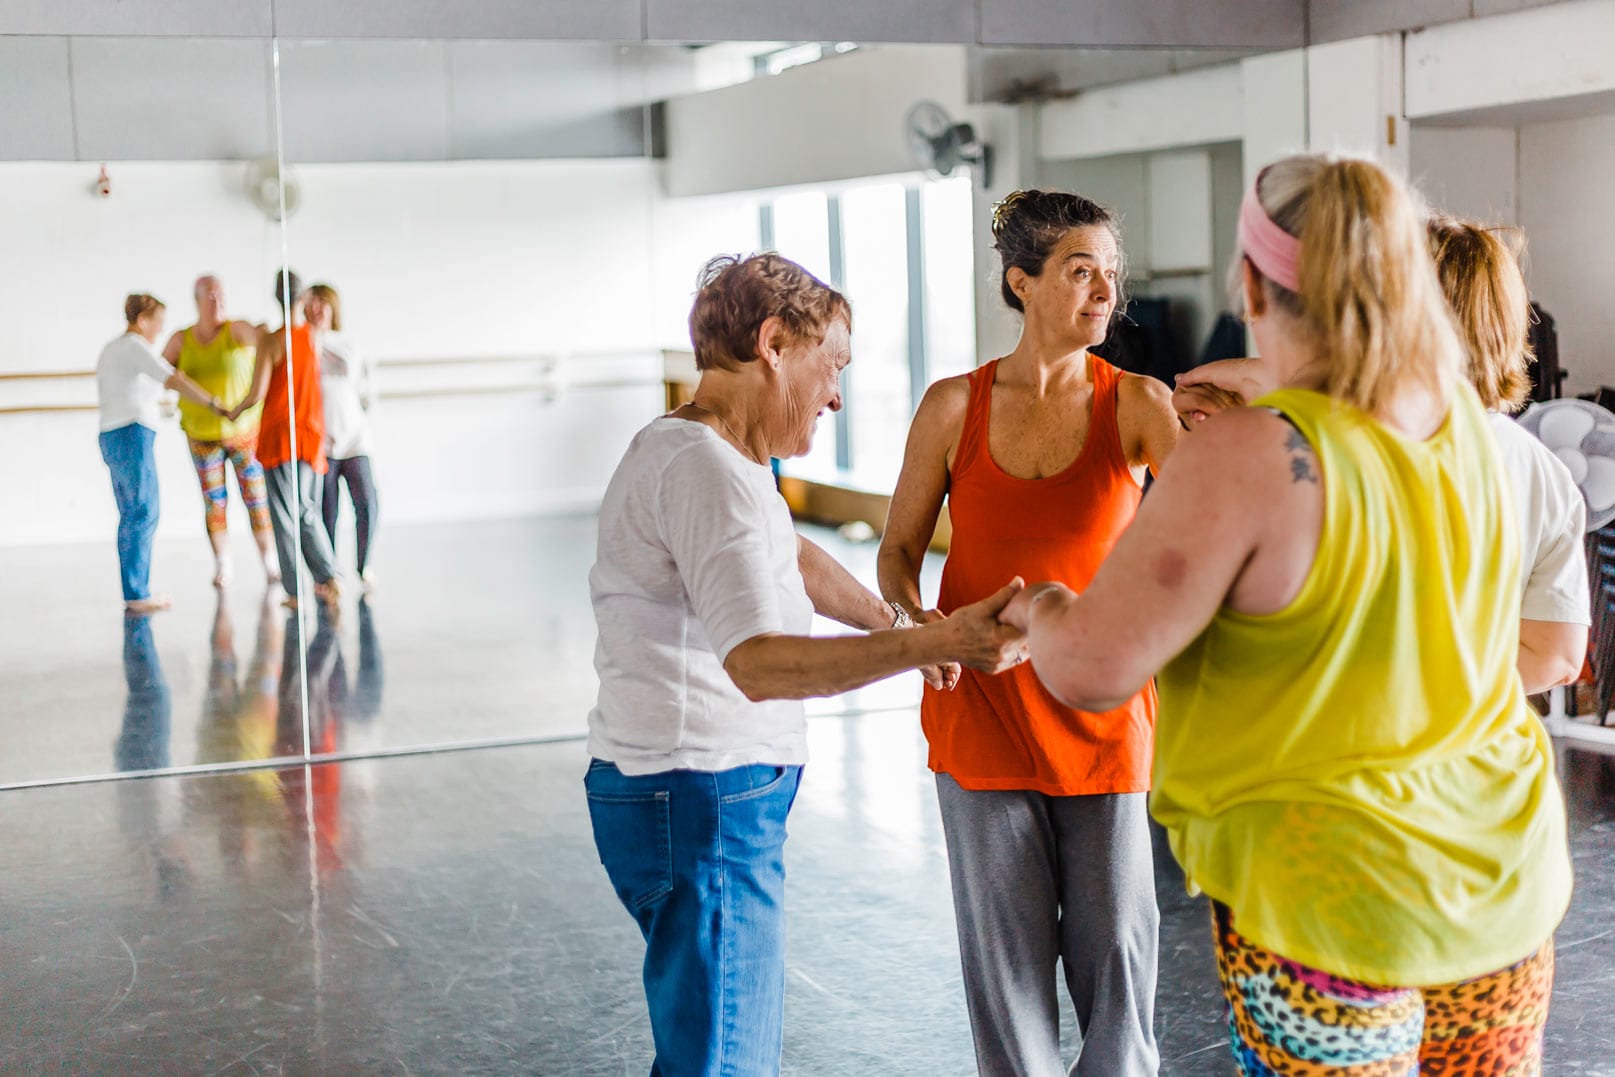 A dance class taking place in the Dance Space. Four women wearing brightly coloured exercise clothes stand in a circle, their reflections can be seen in a mirrored wall behind htem.